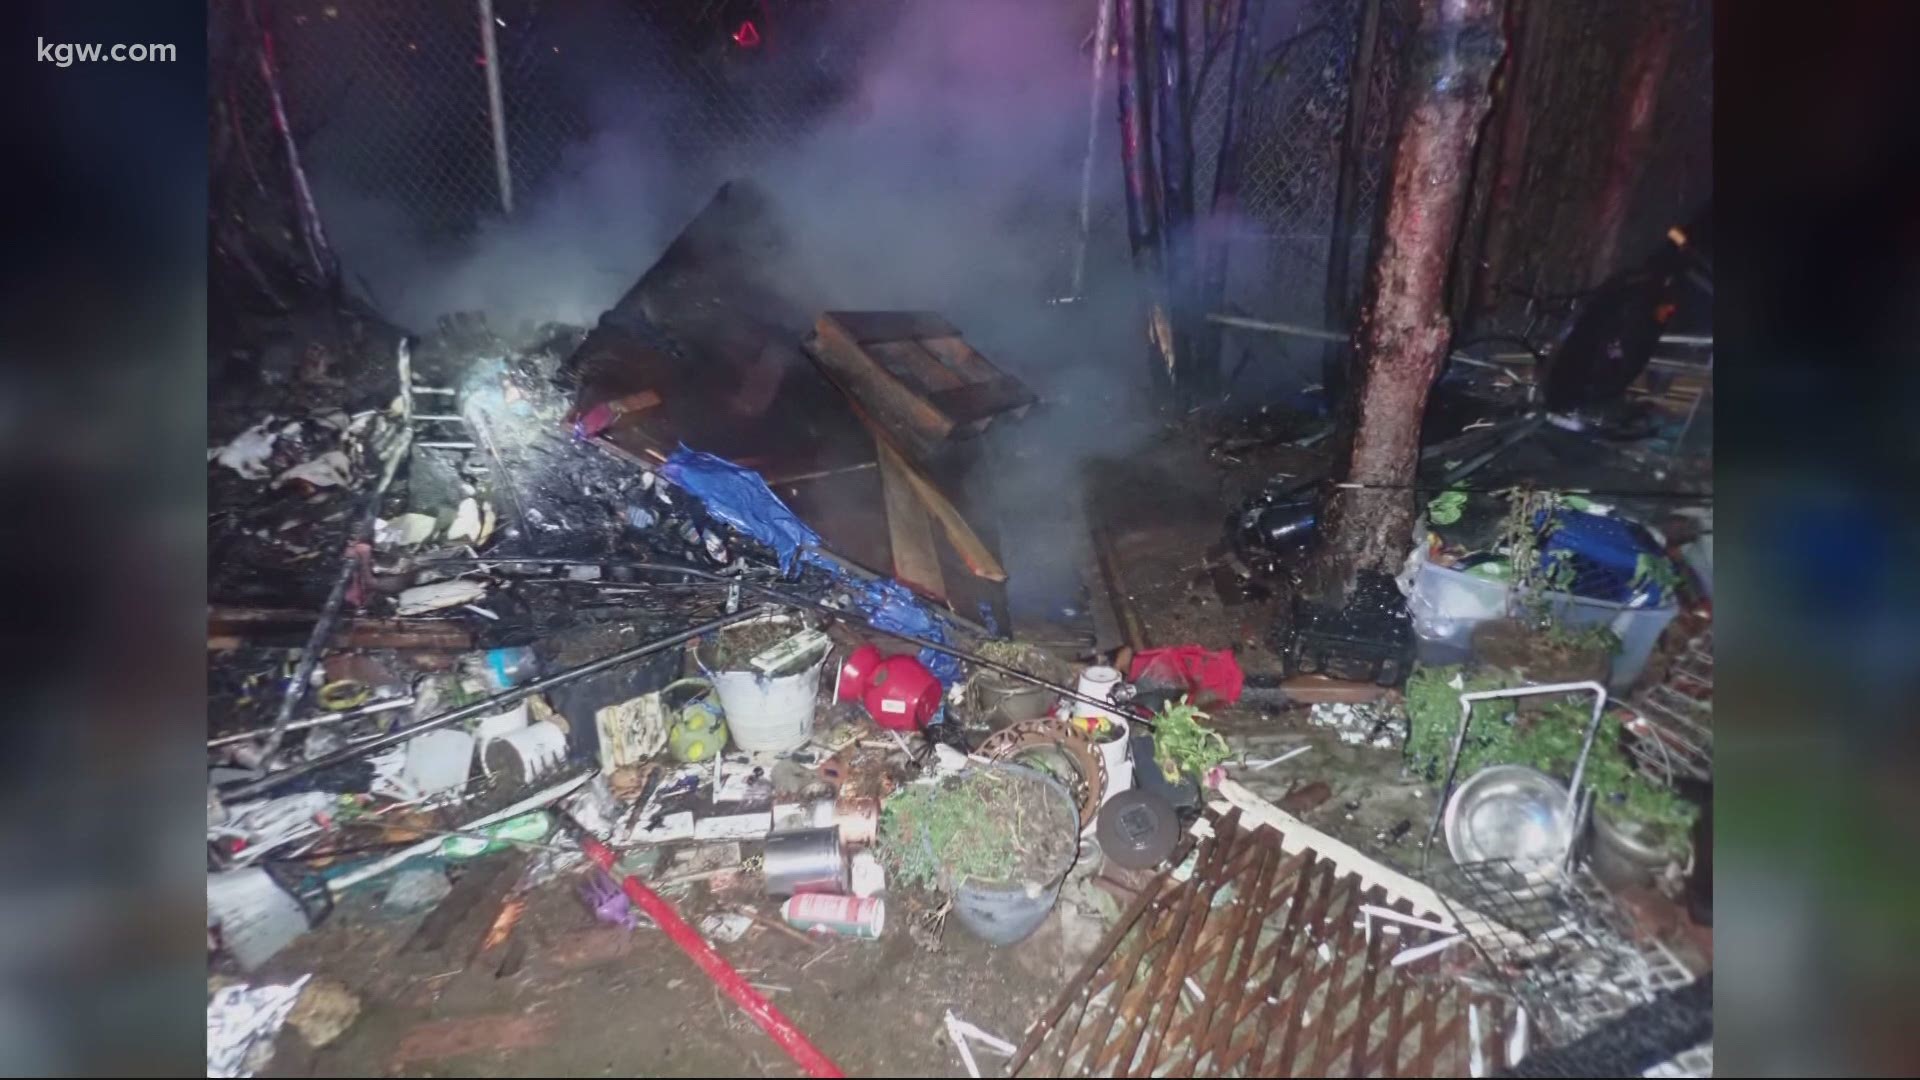 Portland firefighters have been responding to countless calls of tent fires at homeless camps around the city over the last few weeks.